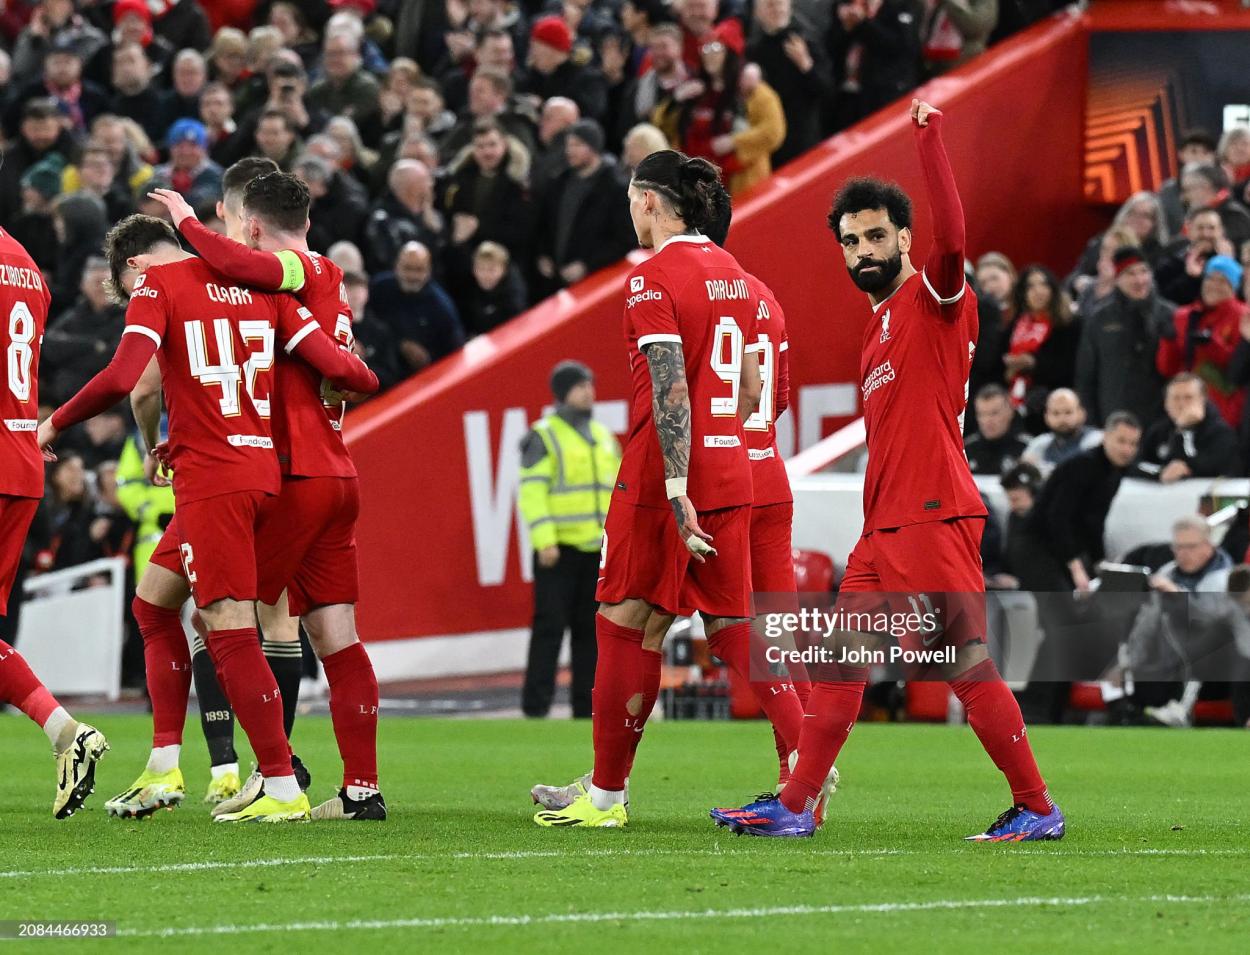 Salah became the first Liverpool player to score 20 goals in seven consecutive seasons following his strike against Sparta Prague (Photo by John Powell/Liverpool FC via Getty Images)